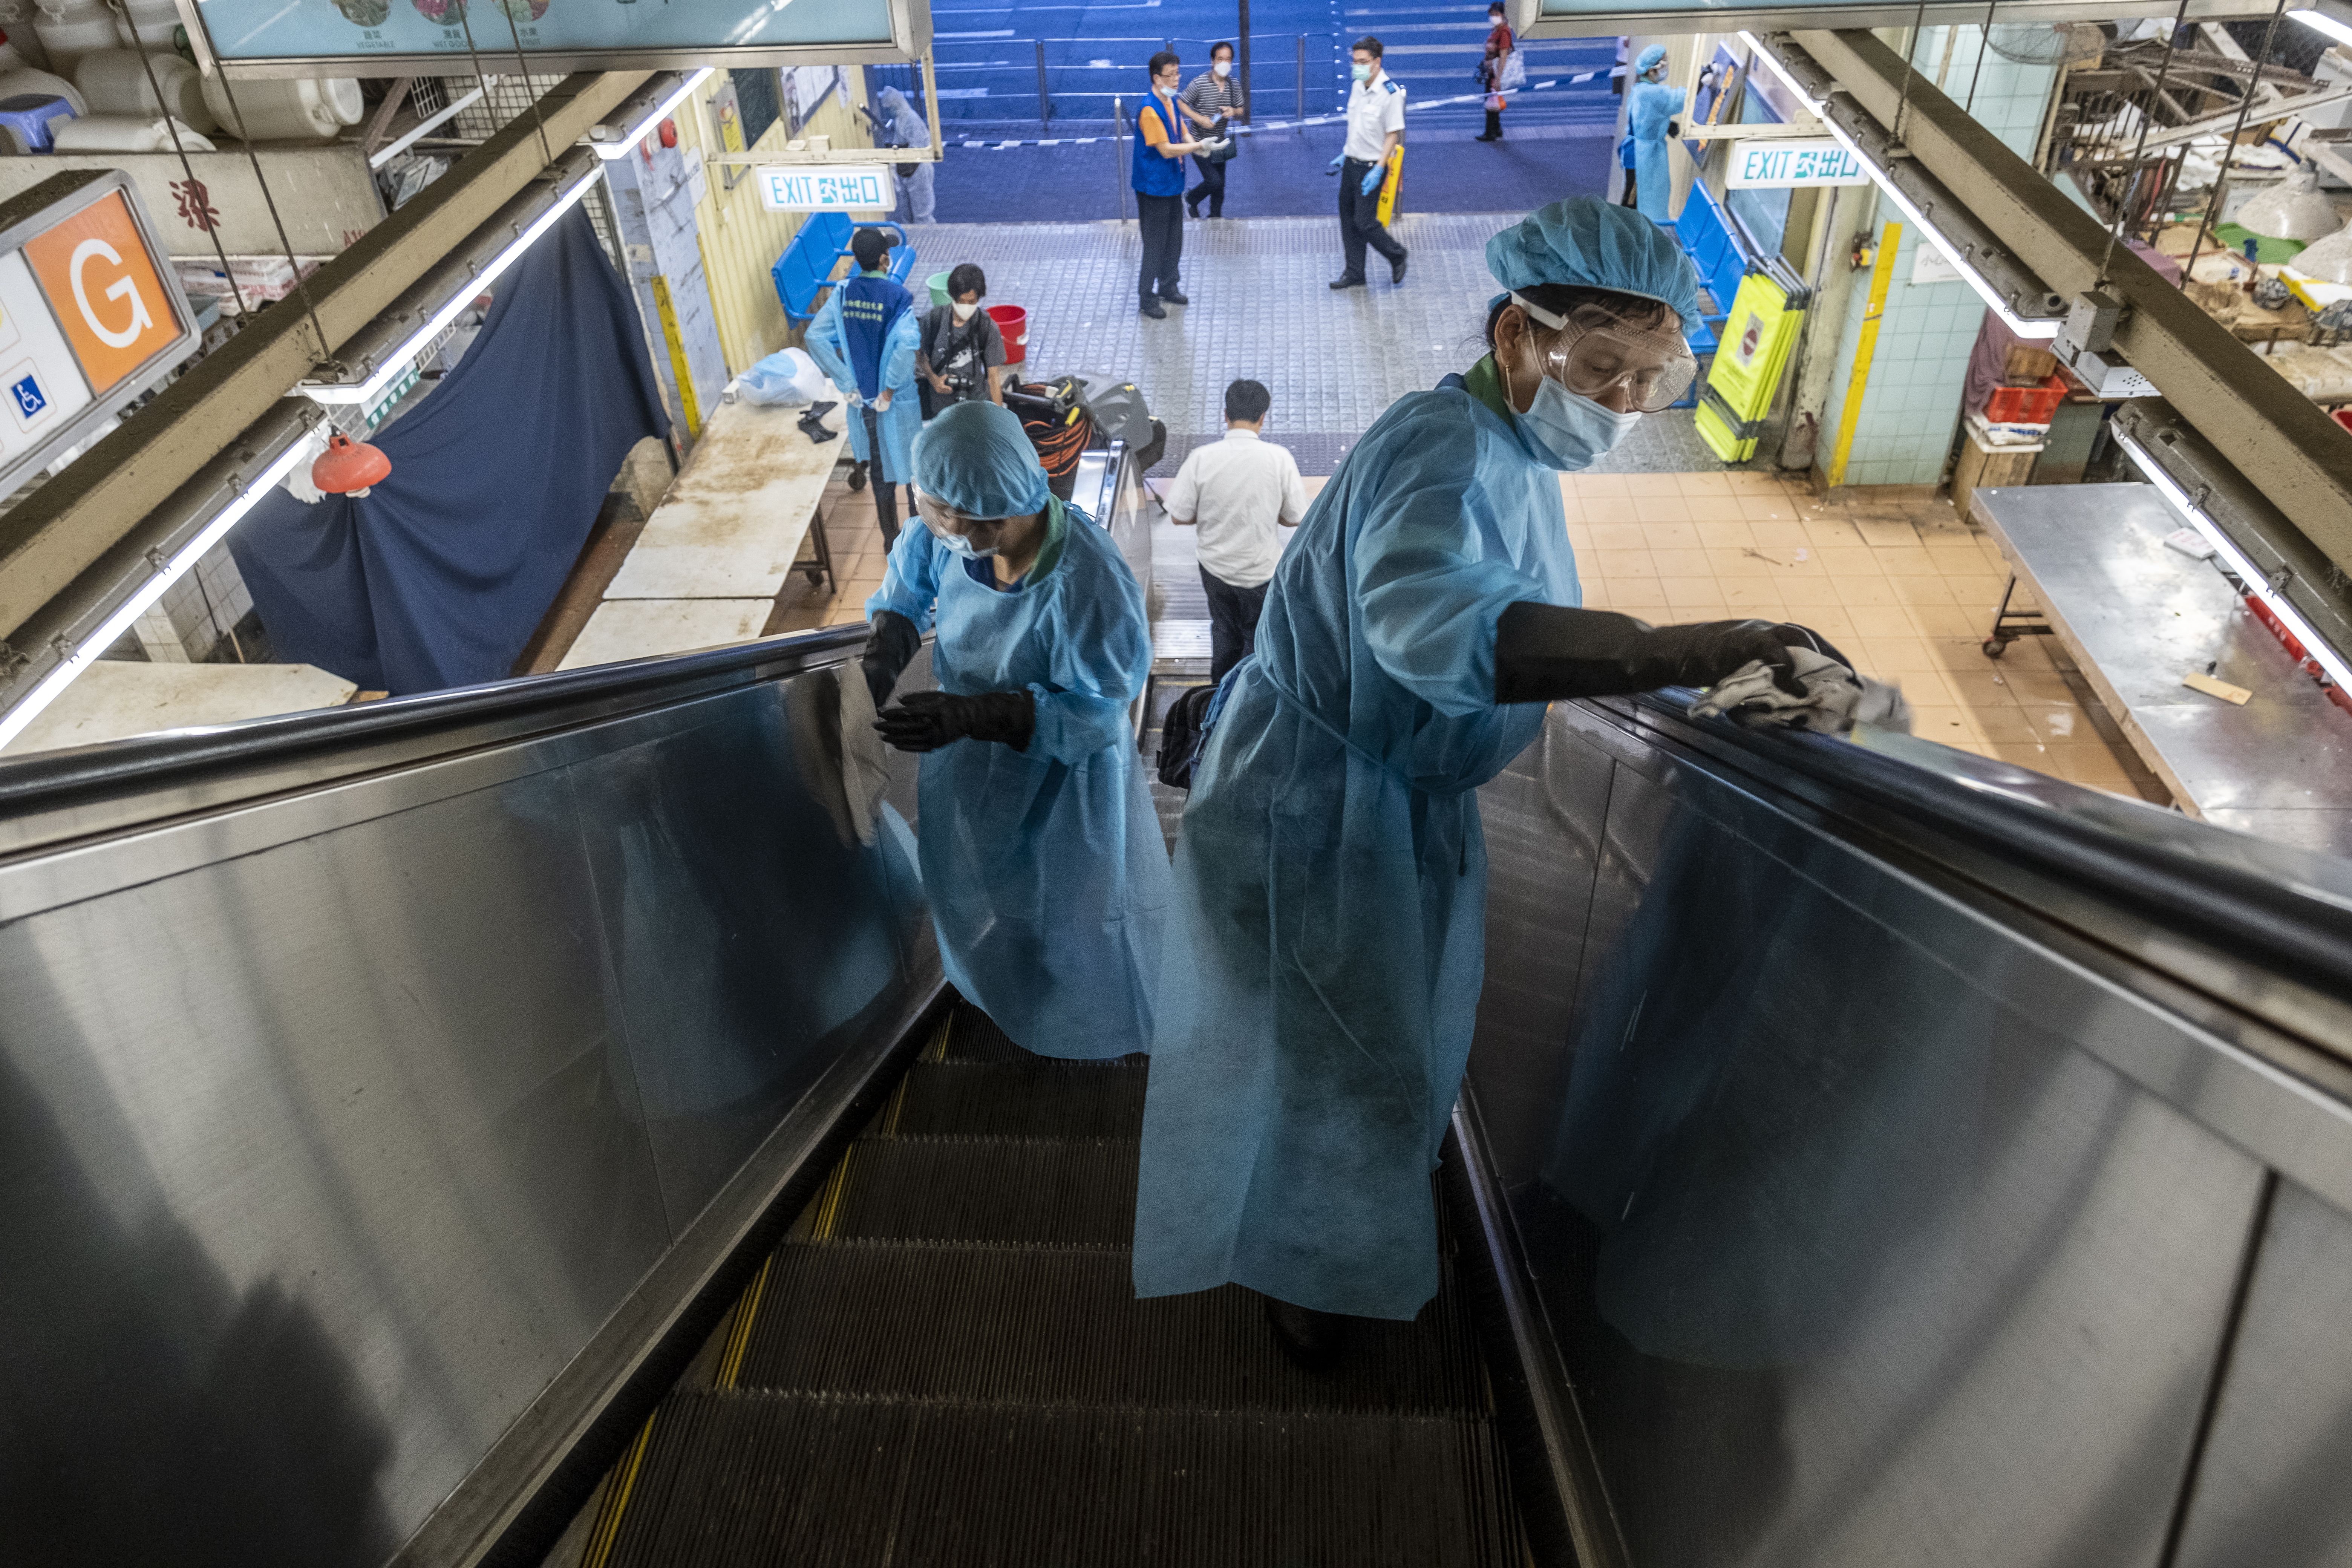 A Food and Environmental Hygiene Department contractor wearing personal protective equipment cleaning and disinfecting an escalator on July 19, 2020 in Hong Kong, China. Hong Kong